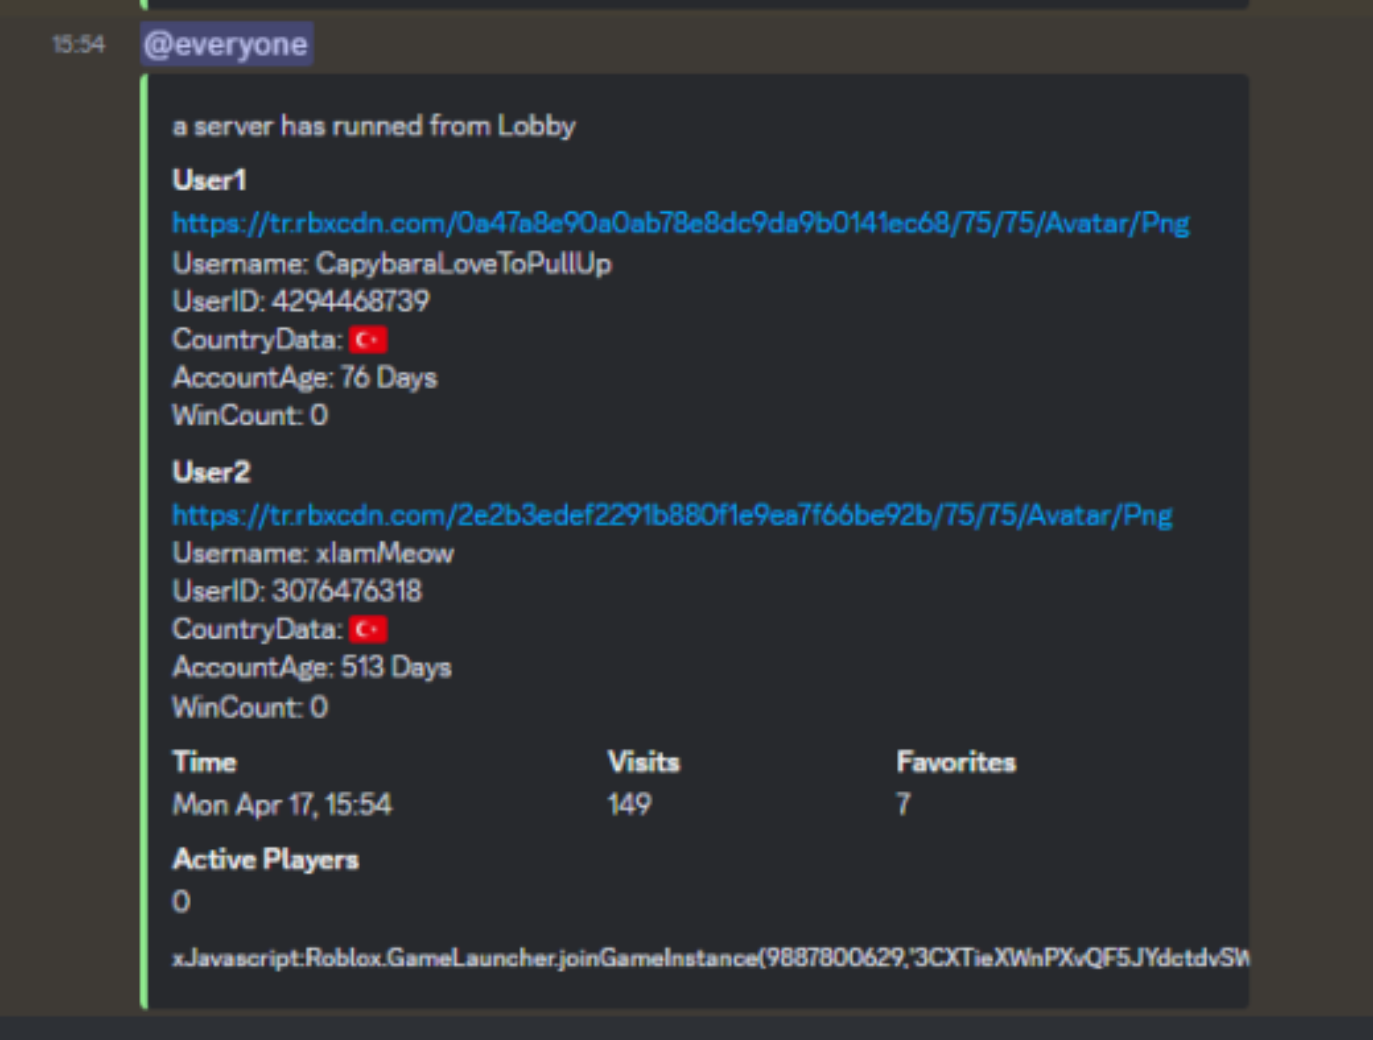 Discord Activity Logger/Shift Logger – Clearly Development